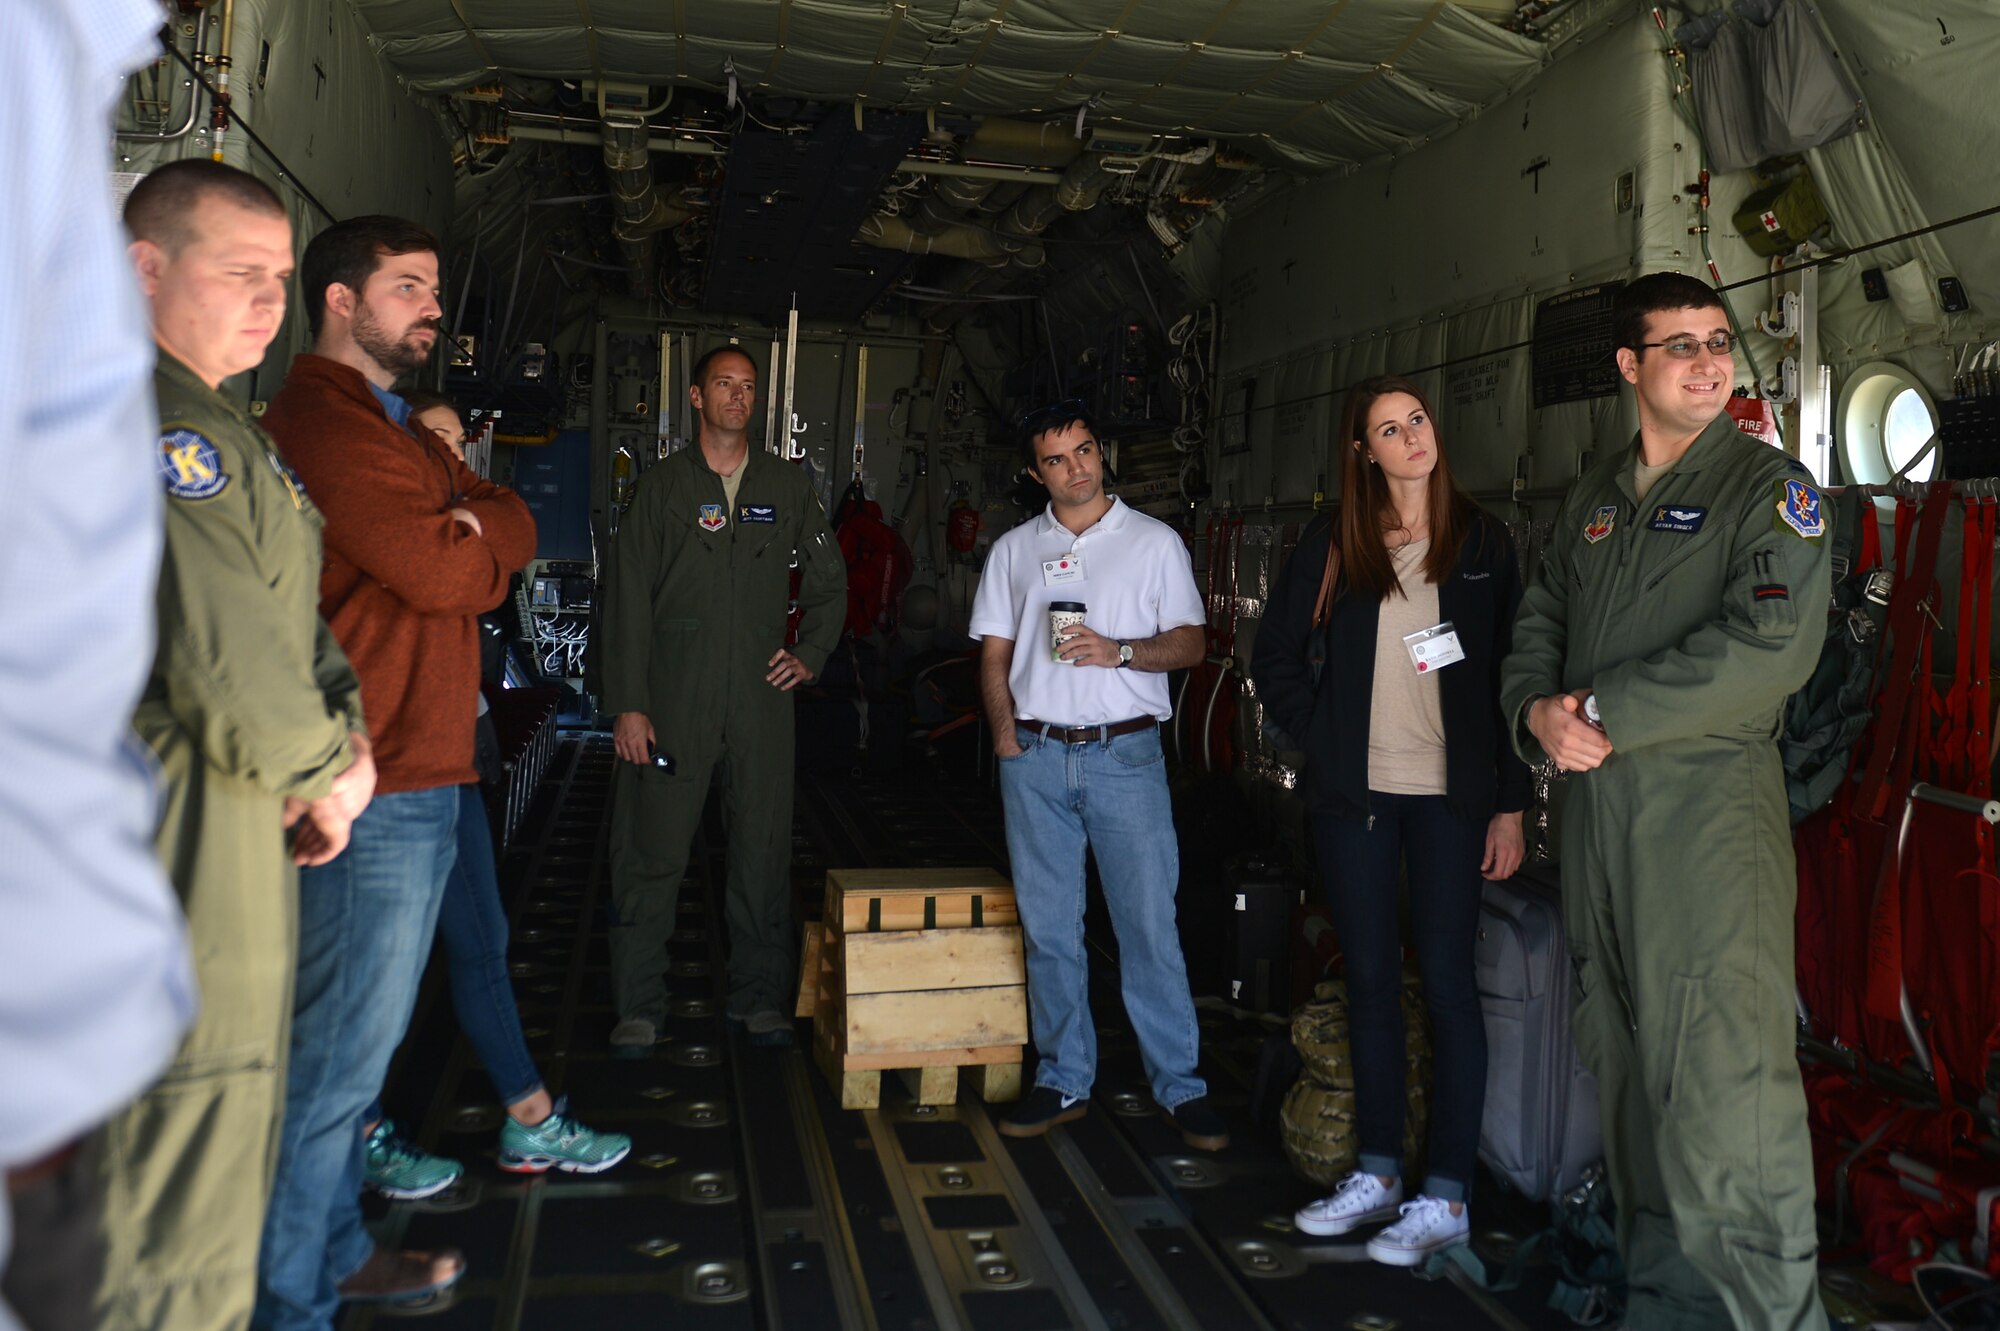 Congressional staff members stand inside an HC-130J static display at Shaw Air Force Base, S.C., Oct. 28, 2016. During their visit, staffers had the opportunity to learn about the functions of various aircraft, including the A-10 Thunderbolt II, HH-60G Pave Hawk and F-16CM Fighting Falcon. (U.S. Air Force photo by Airman 1st Class Christopher Maldonado)